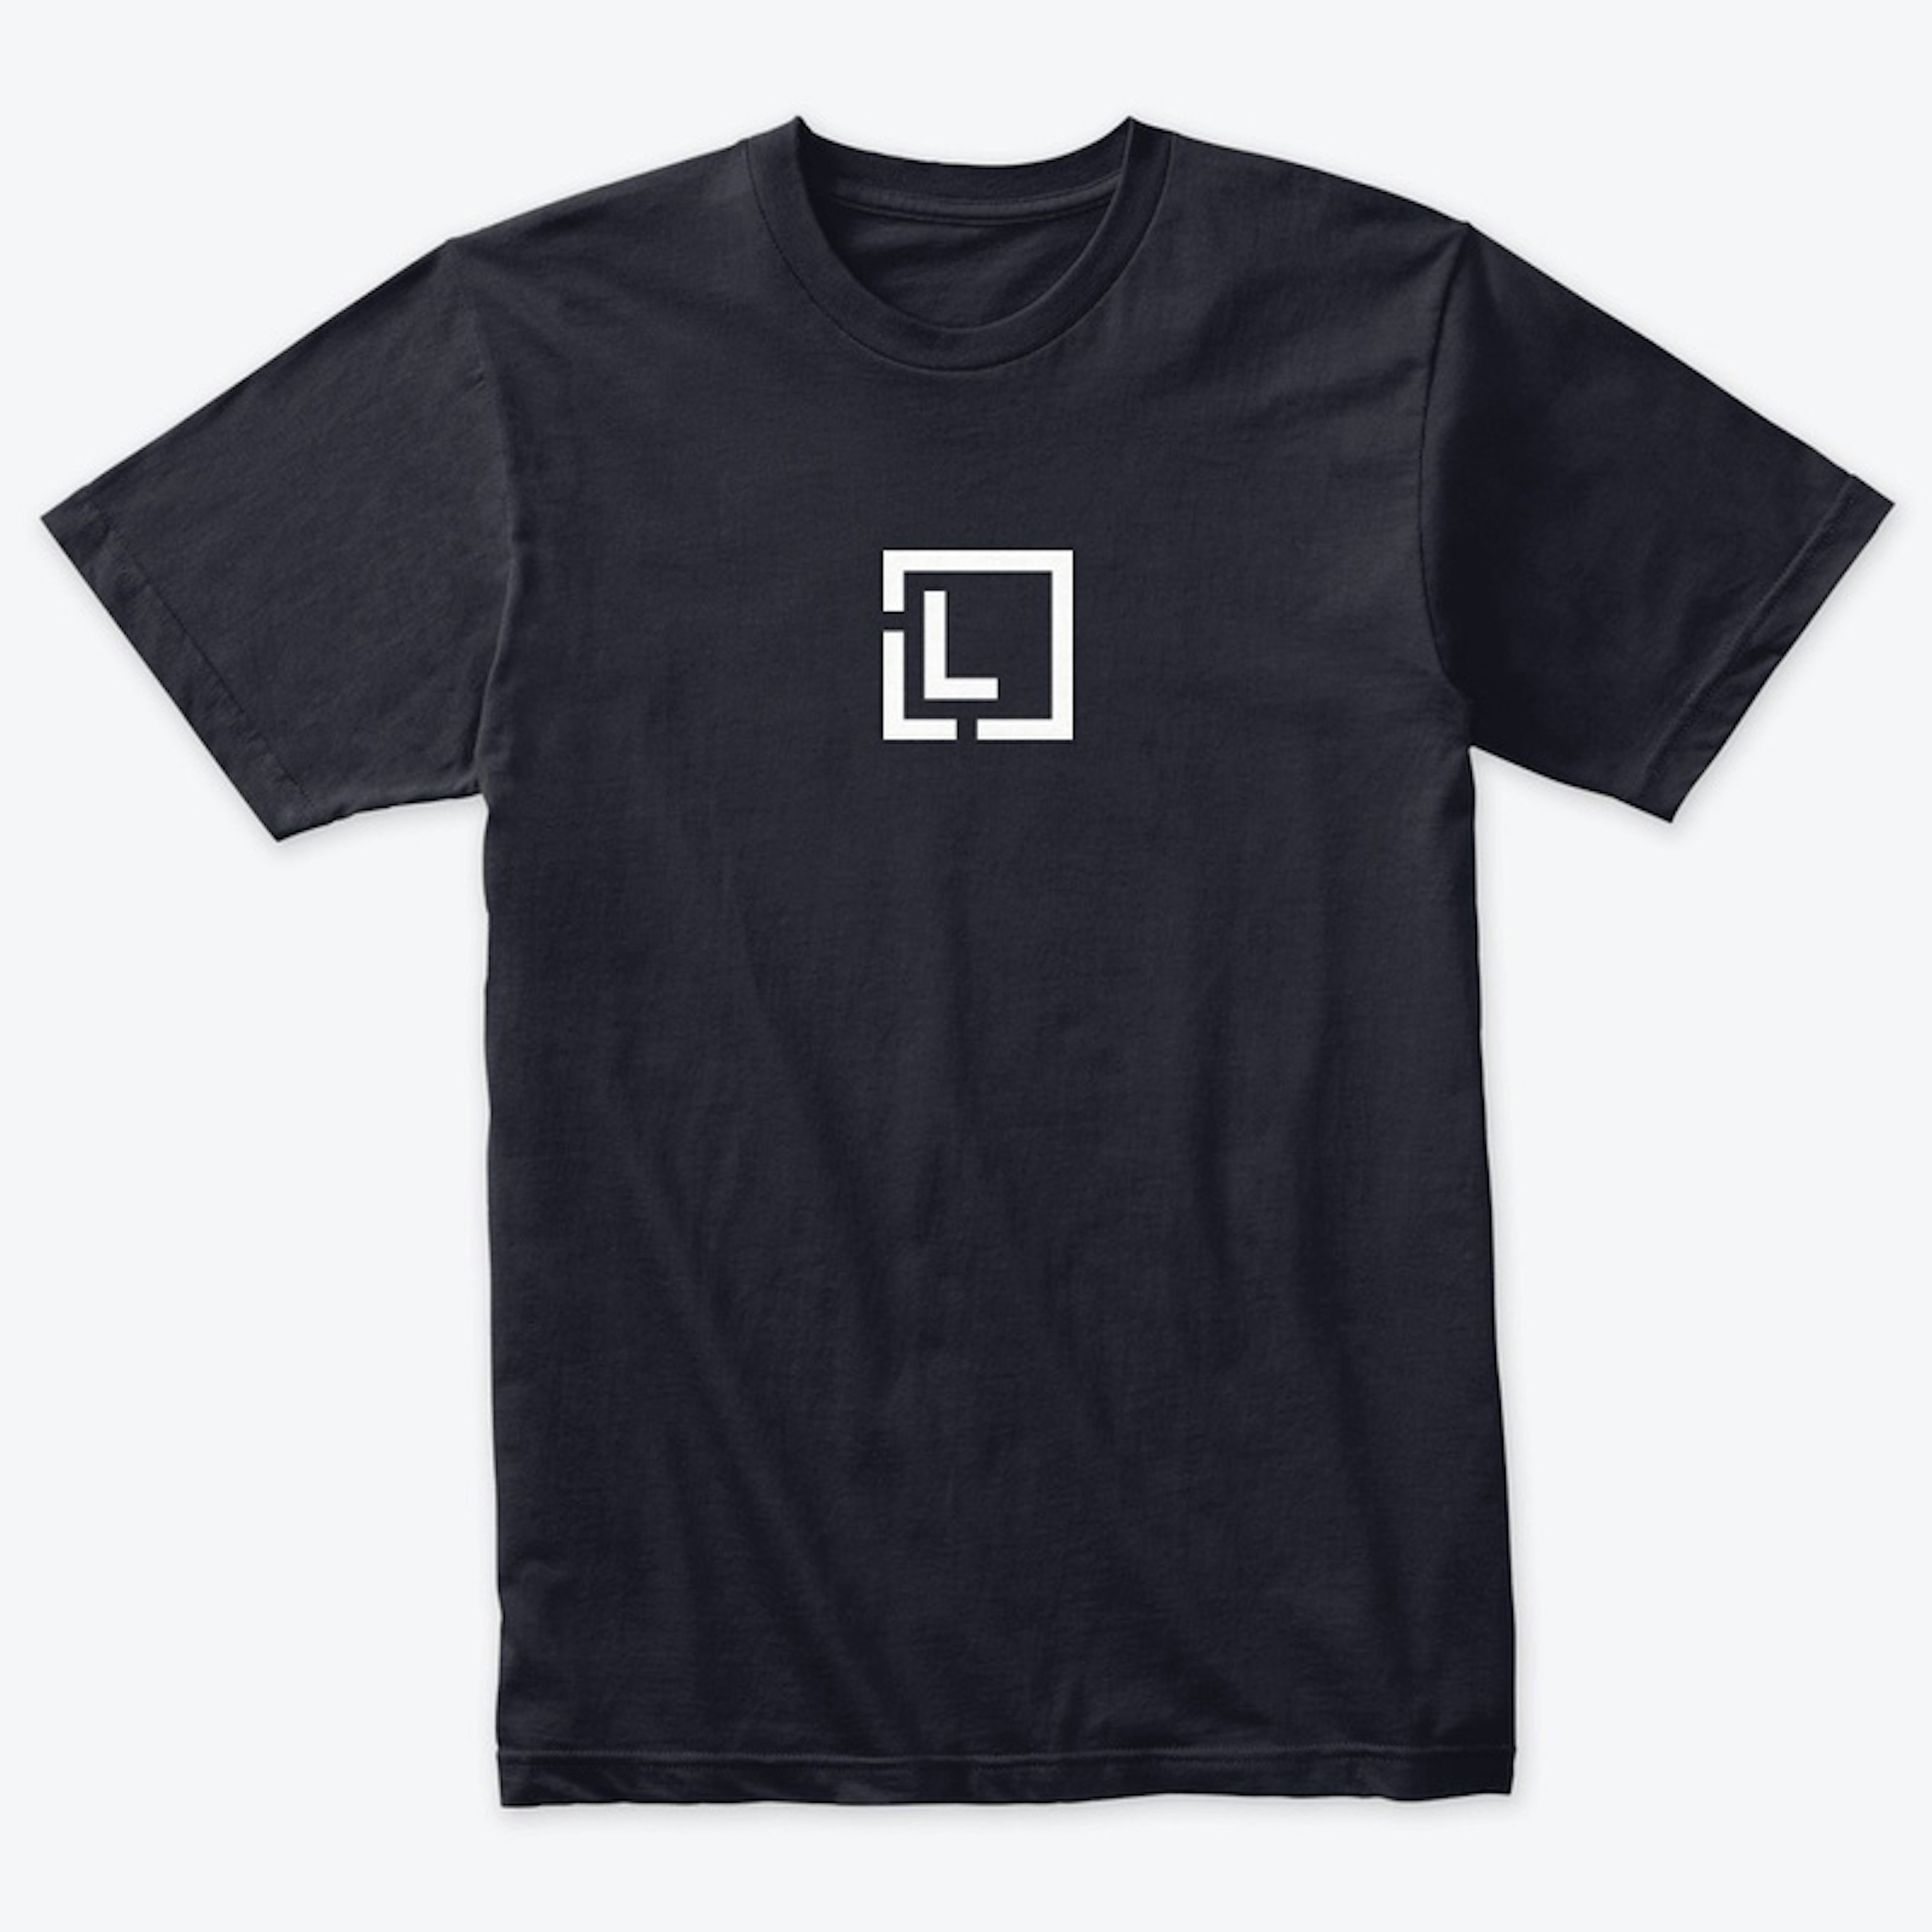 LL Triblend Tee - 2-sided